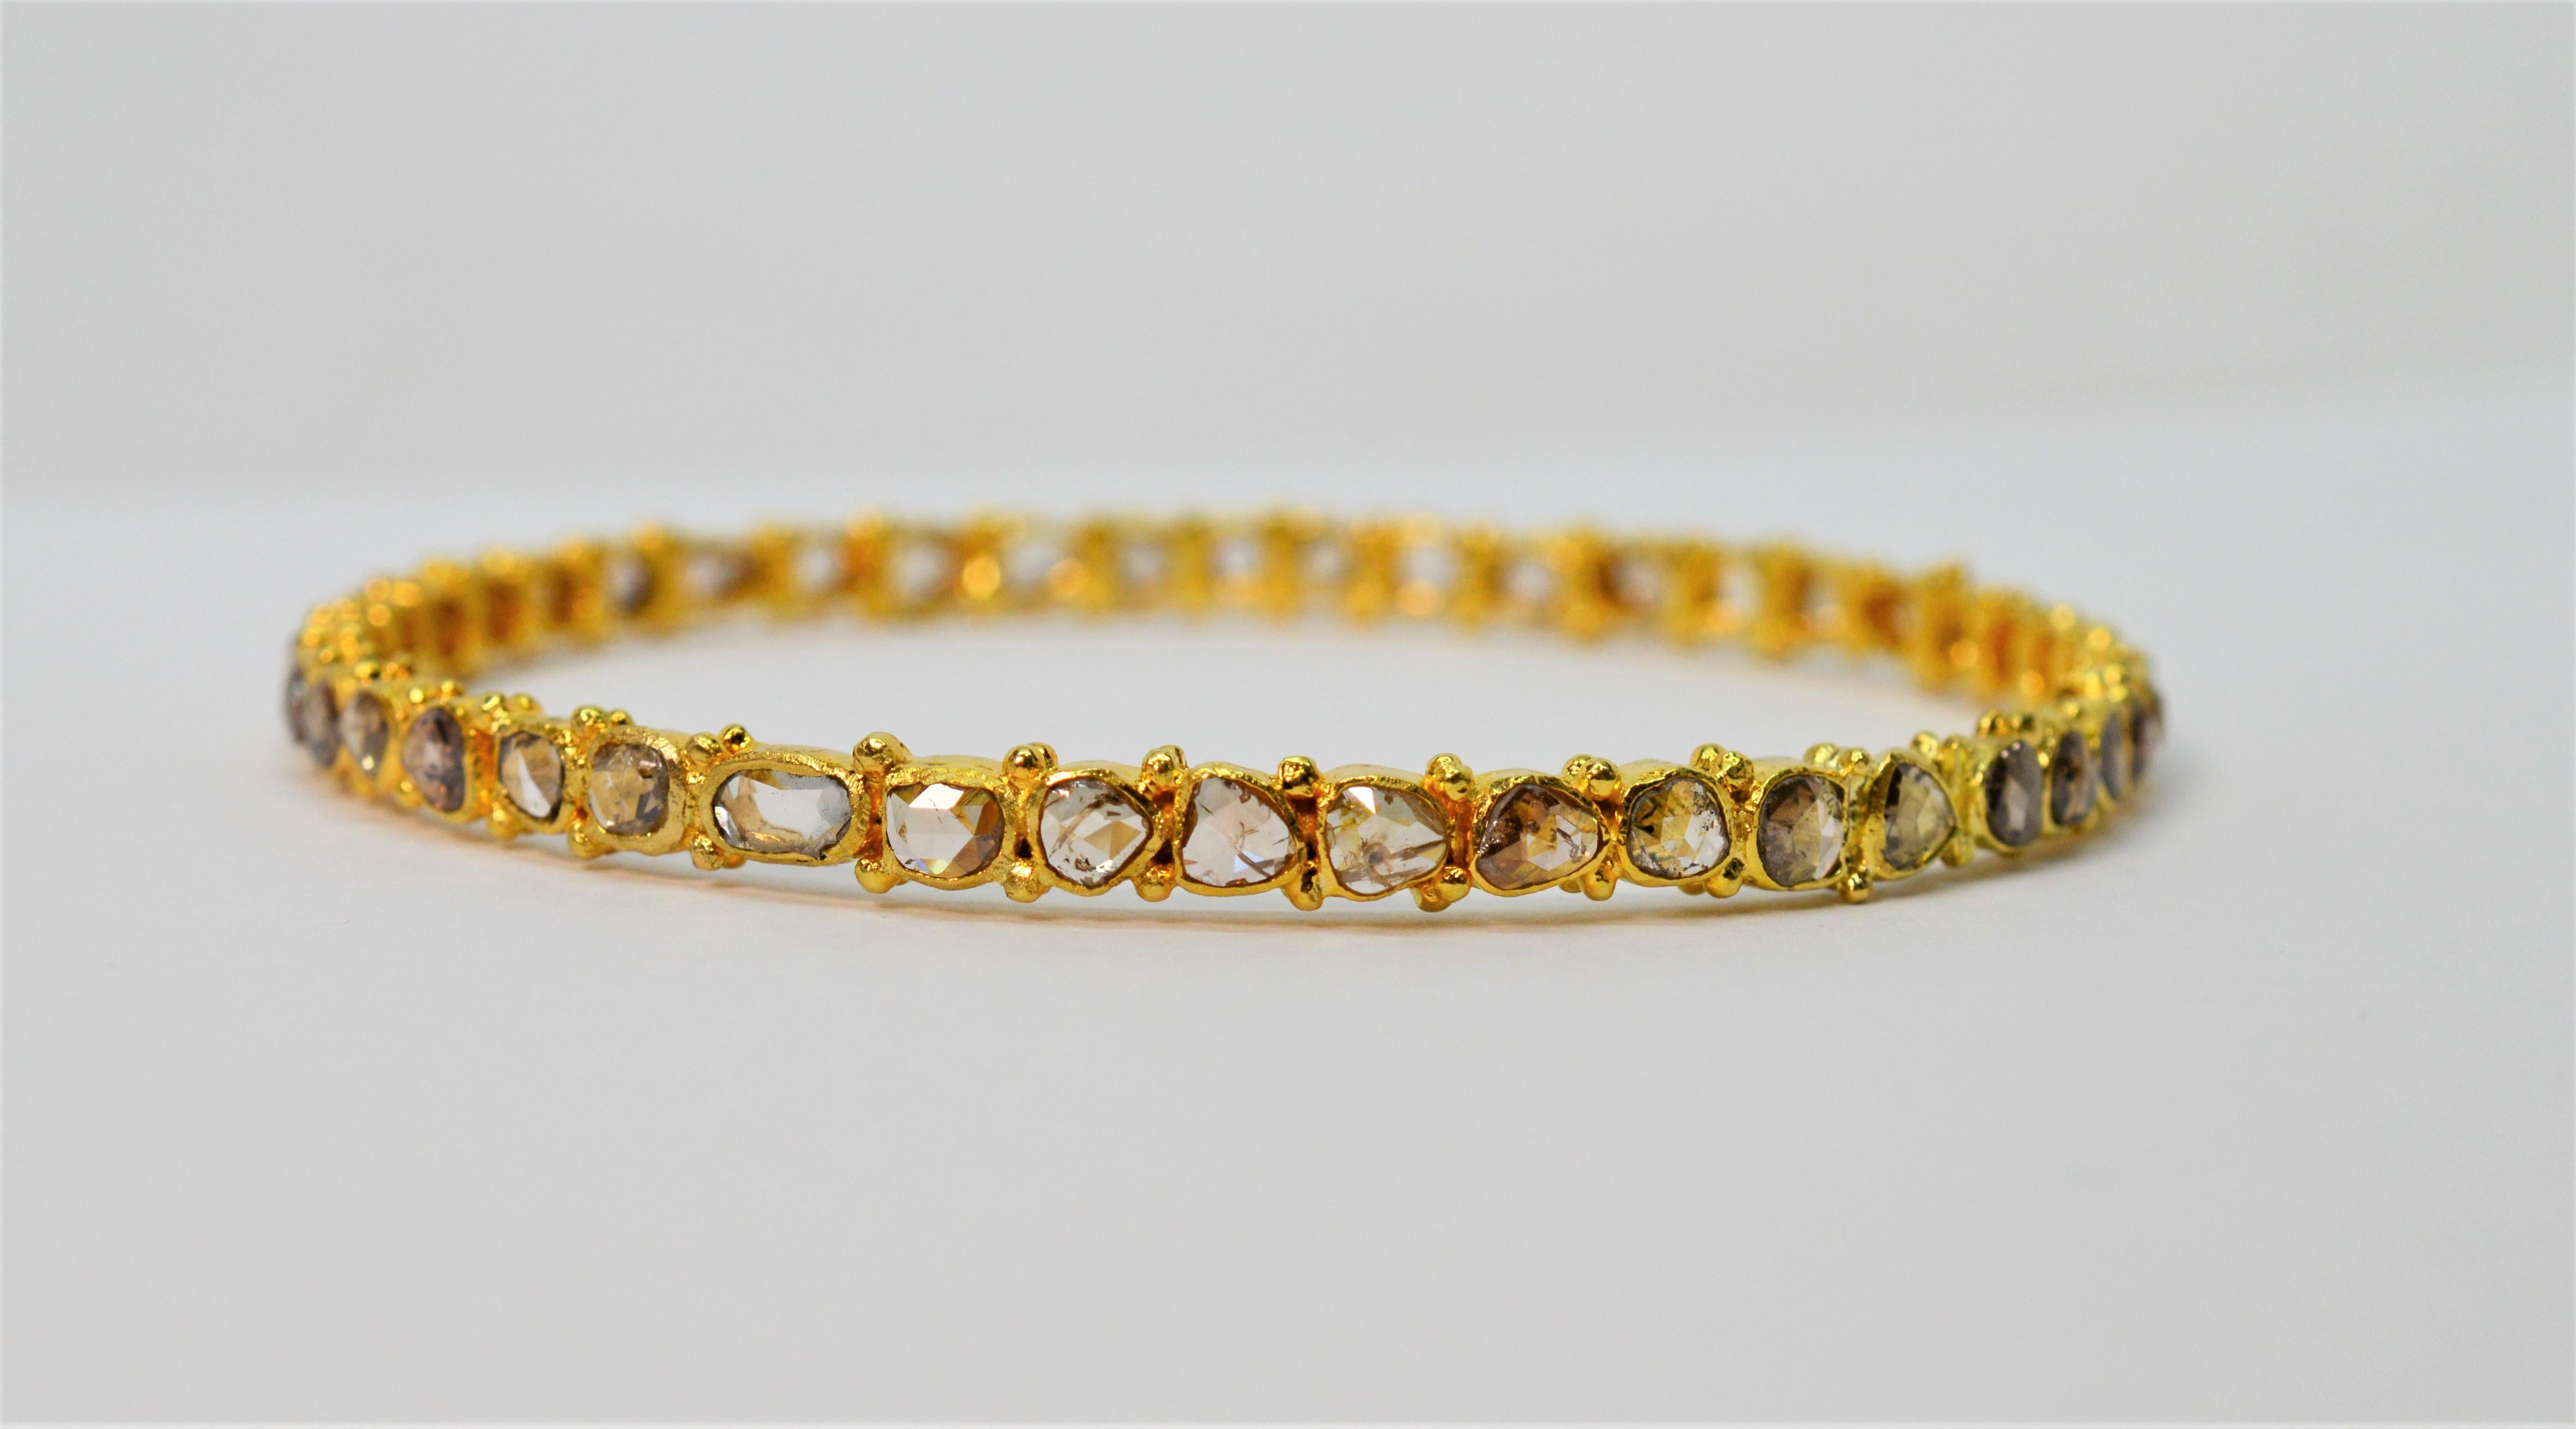 With artisan appeal, this eighteen karat 18K yellow gold hand crafted bangle bracelet displays 4.5 carats total weight of natural hand cut diamonds in various shapes and sizes that are bezel set and contoured in bright yellow gold. The mixed shapes